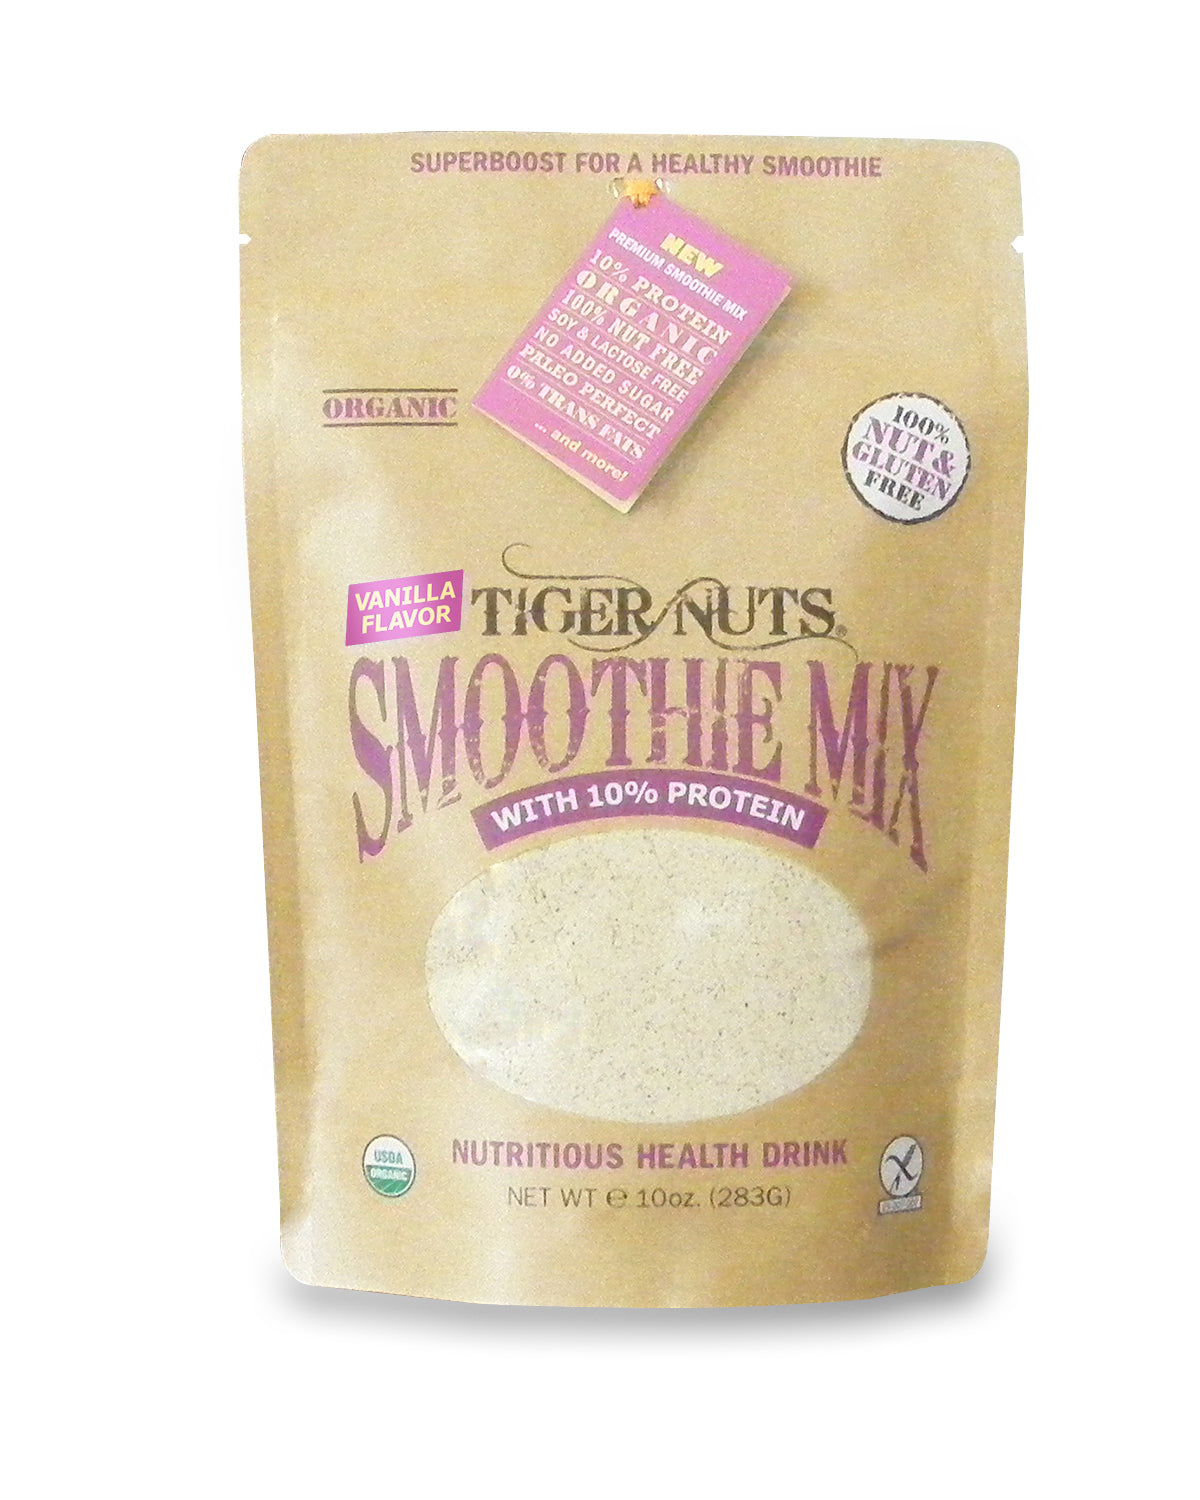 Tiger Nuts Smoothie Mix with 10% Extra Protein and Vanilla Flavor bag - 24 bags by Farm2Me